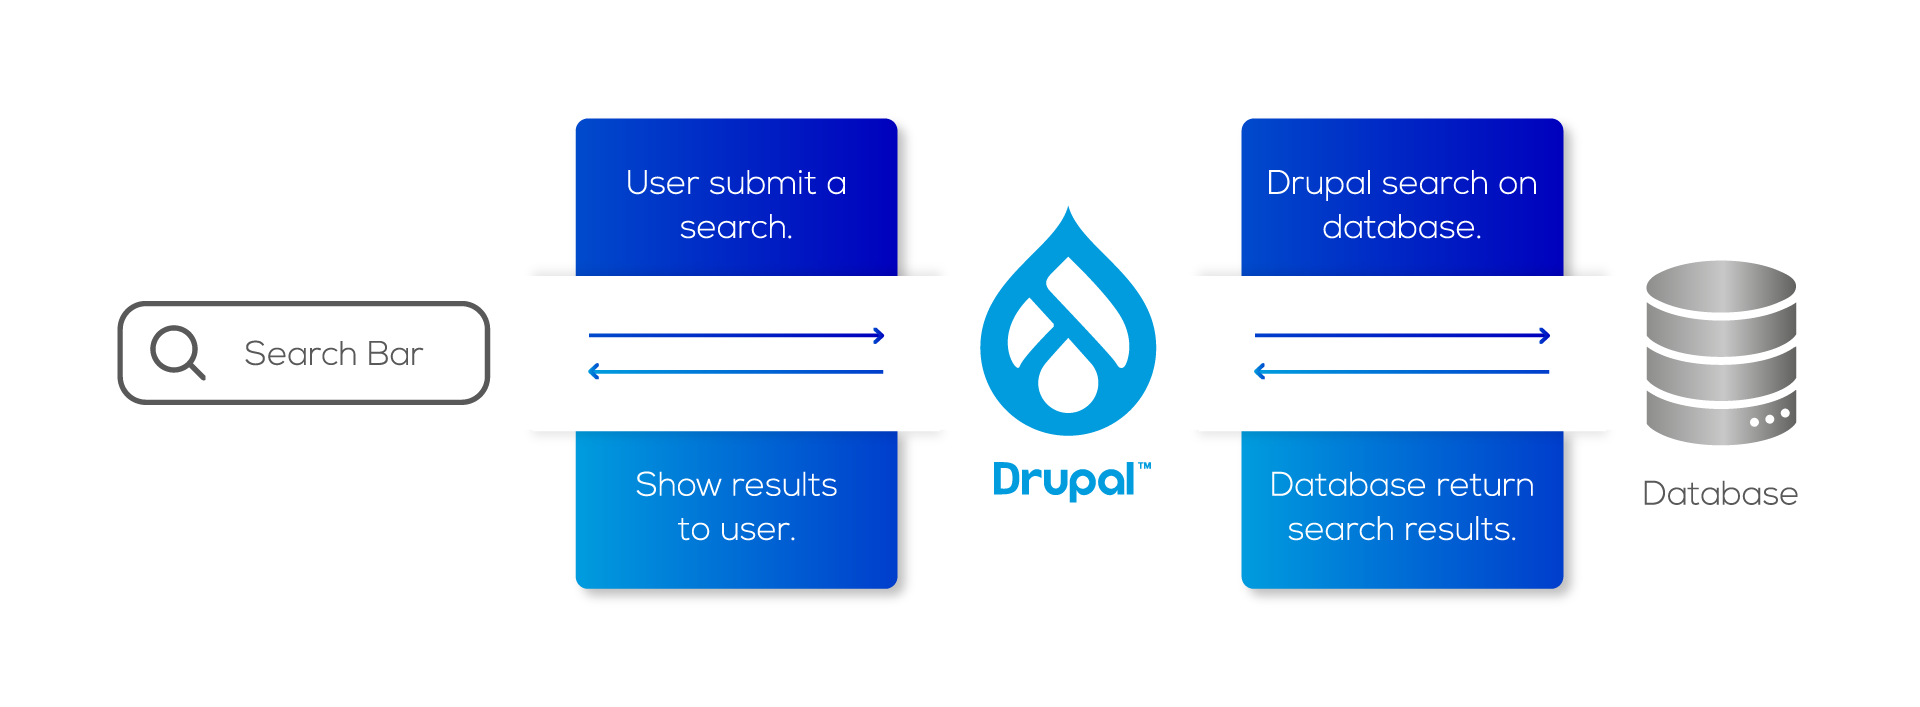 Drupal with Database Search